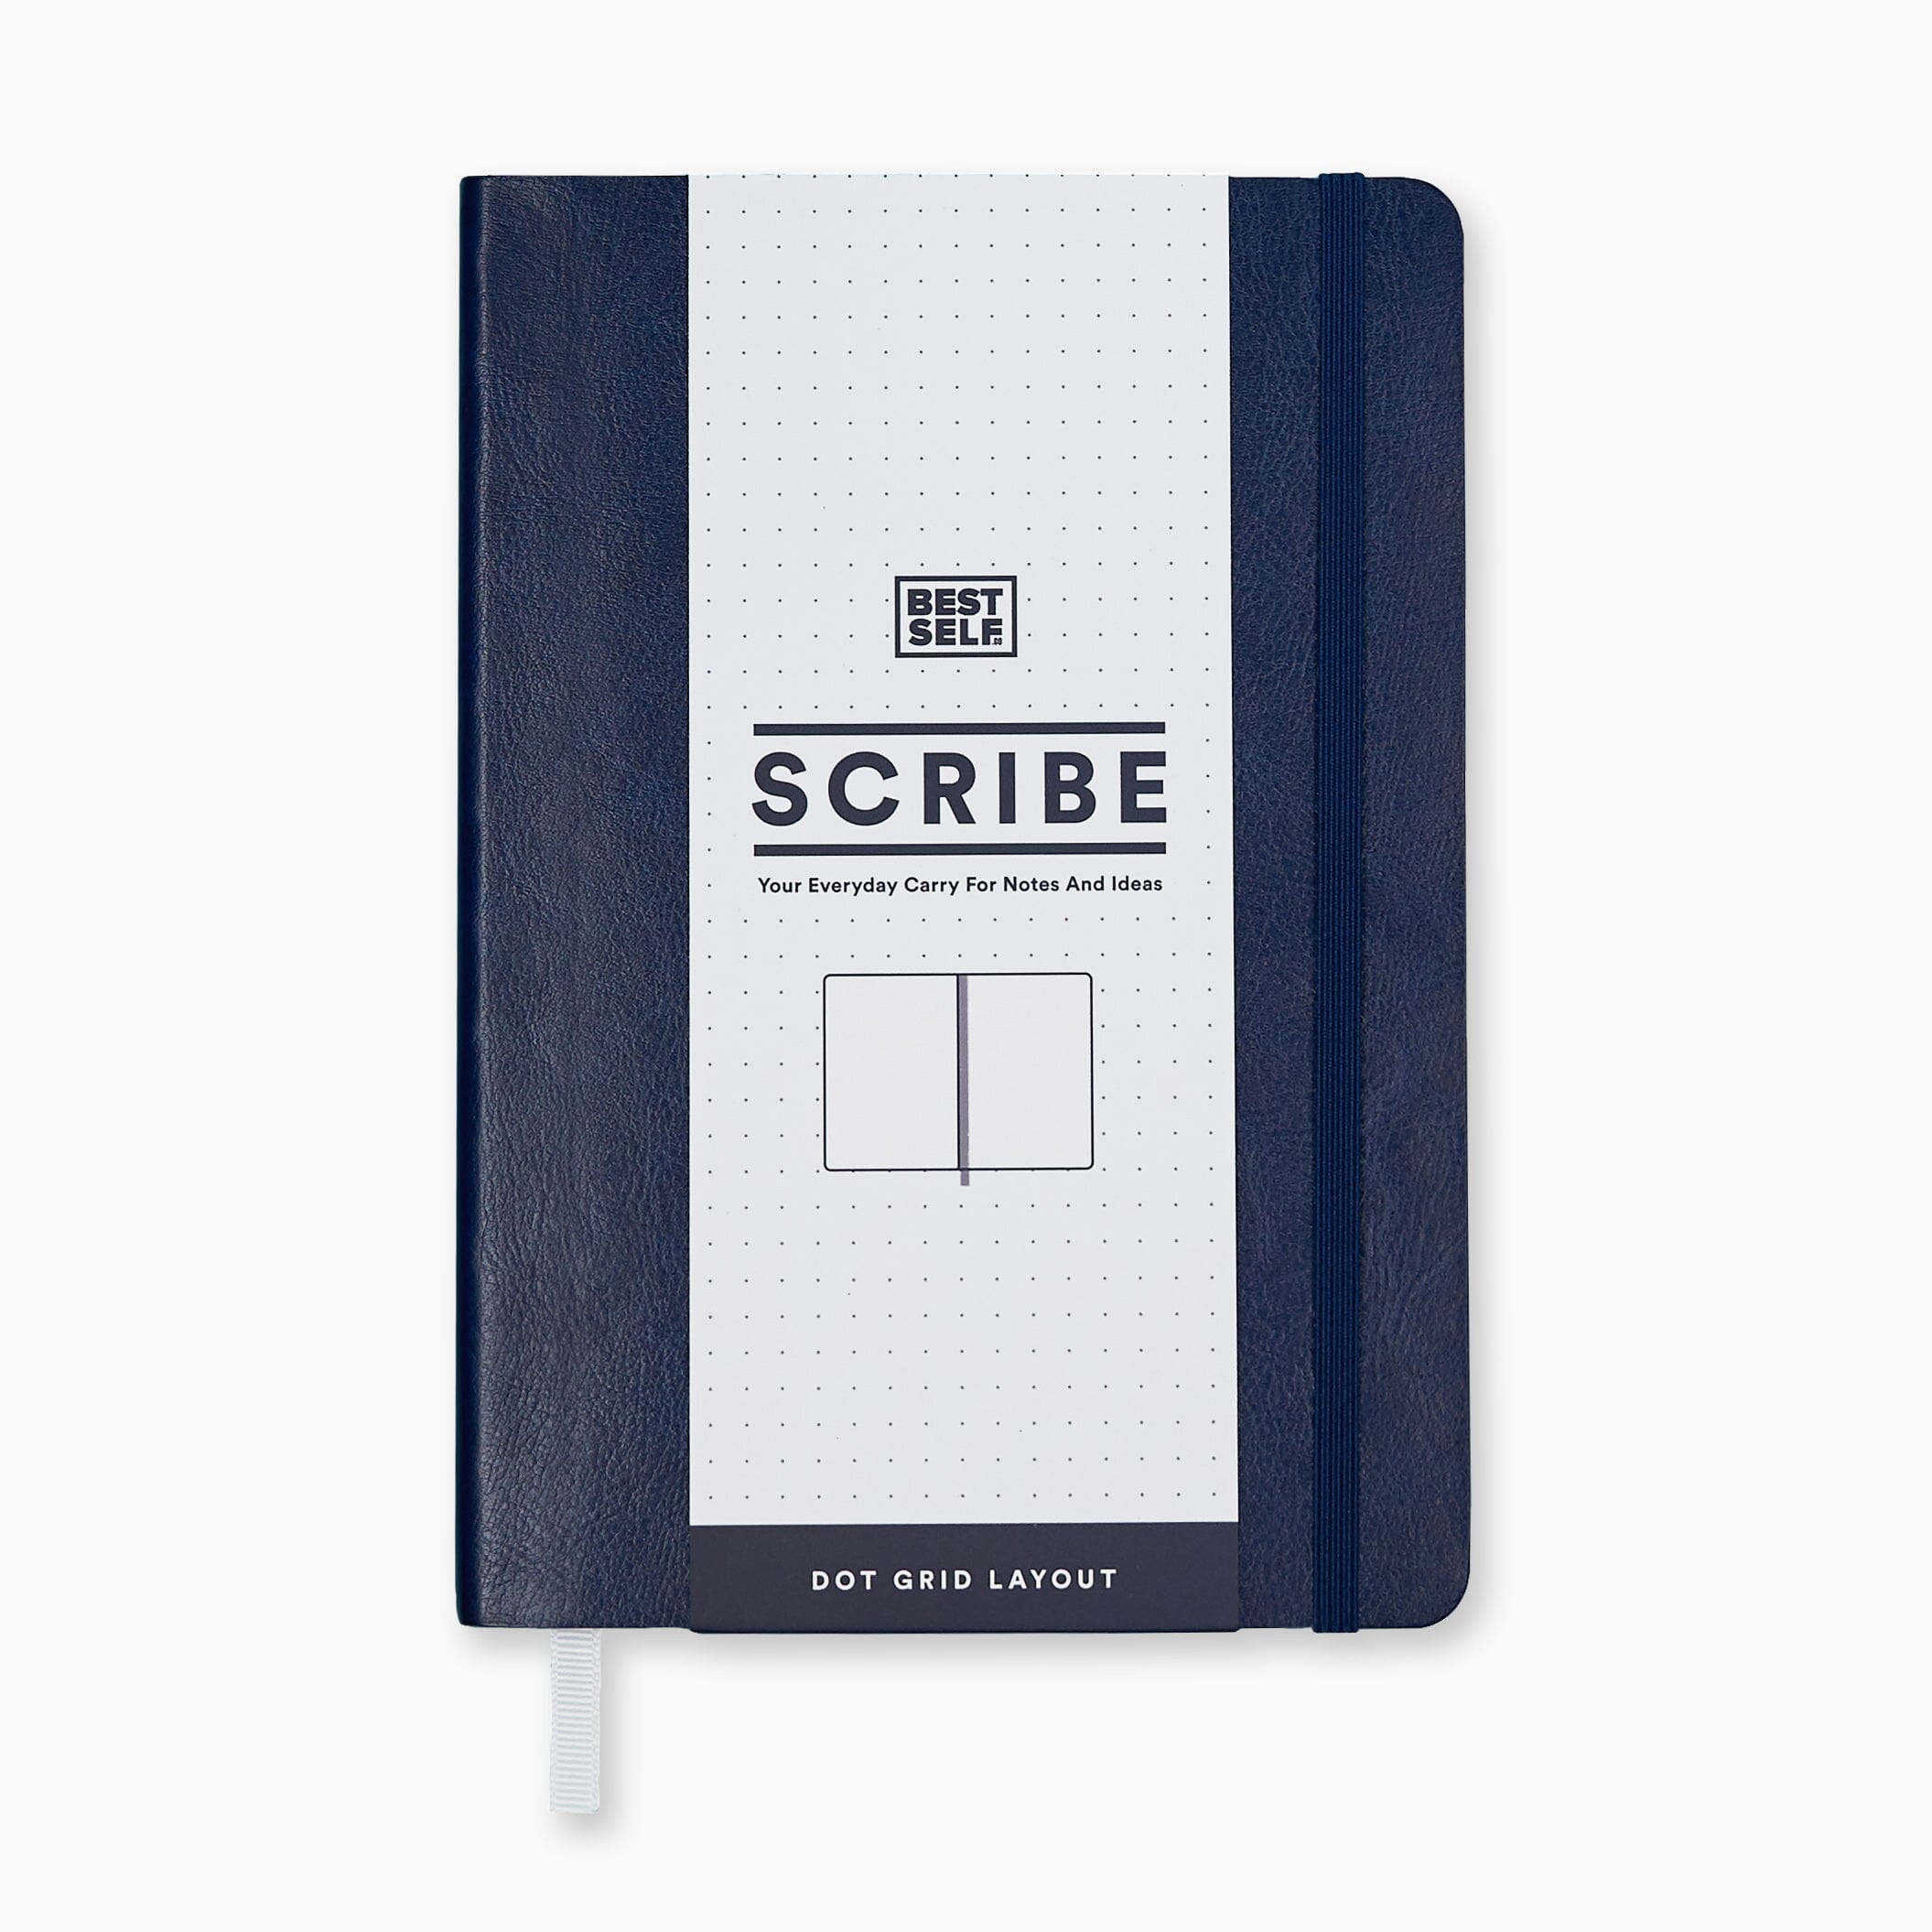 Scribe notebook front view. Your everyday carry for notes and ideas. Dot grid layout. 